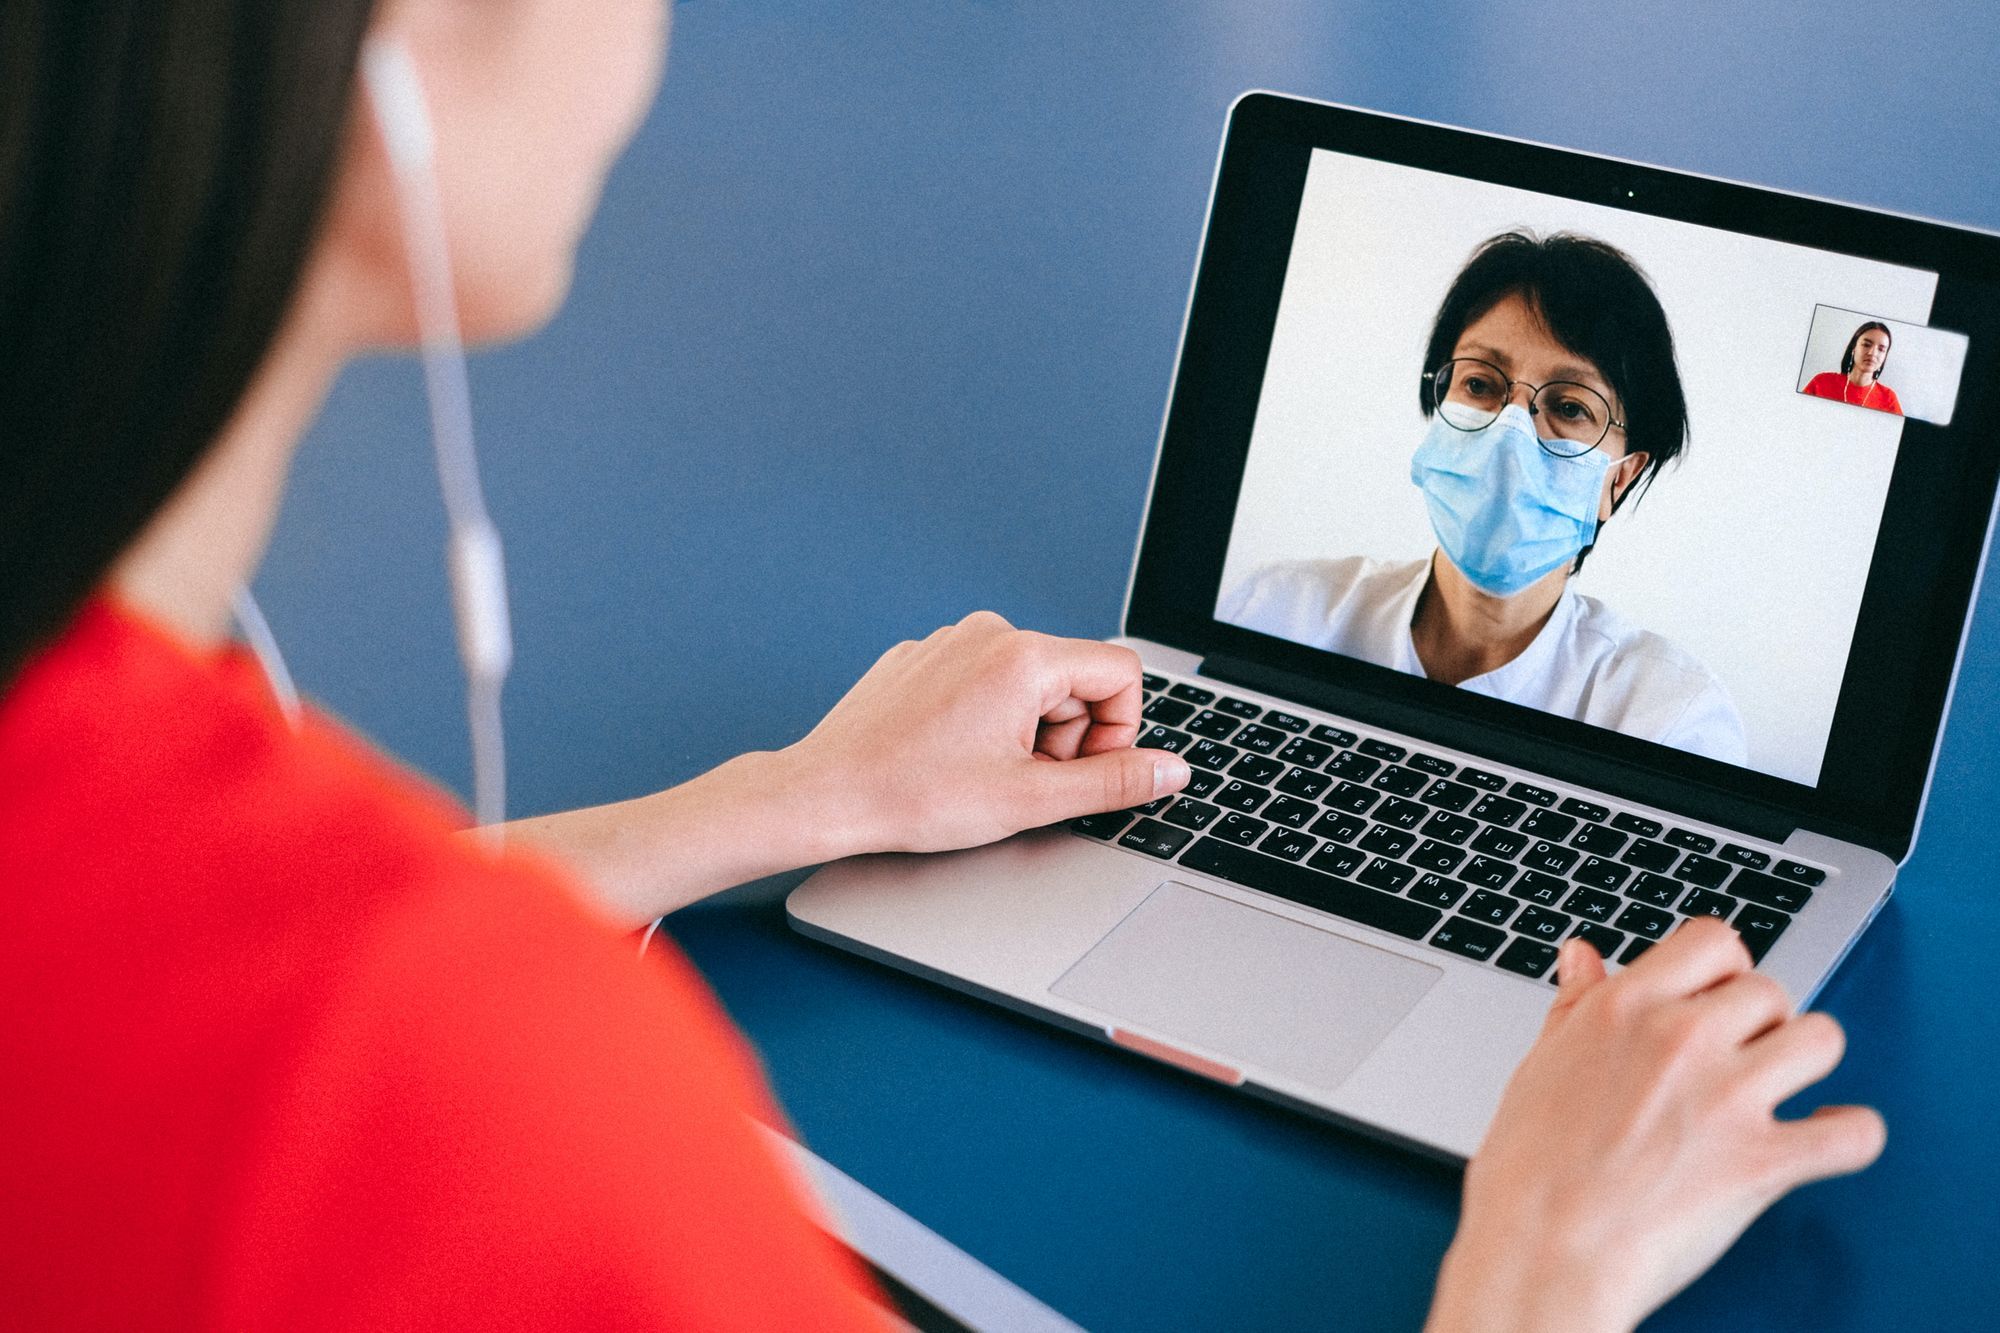 Telemedicine as a Response to COVID-19: A Guide for Physicians